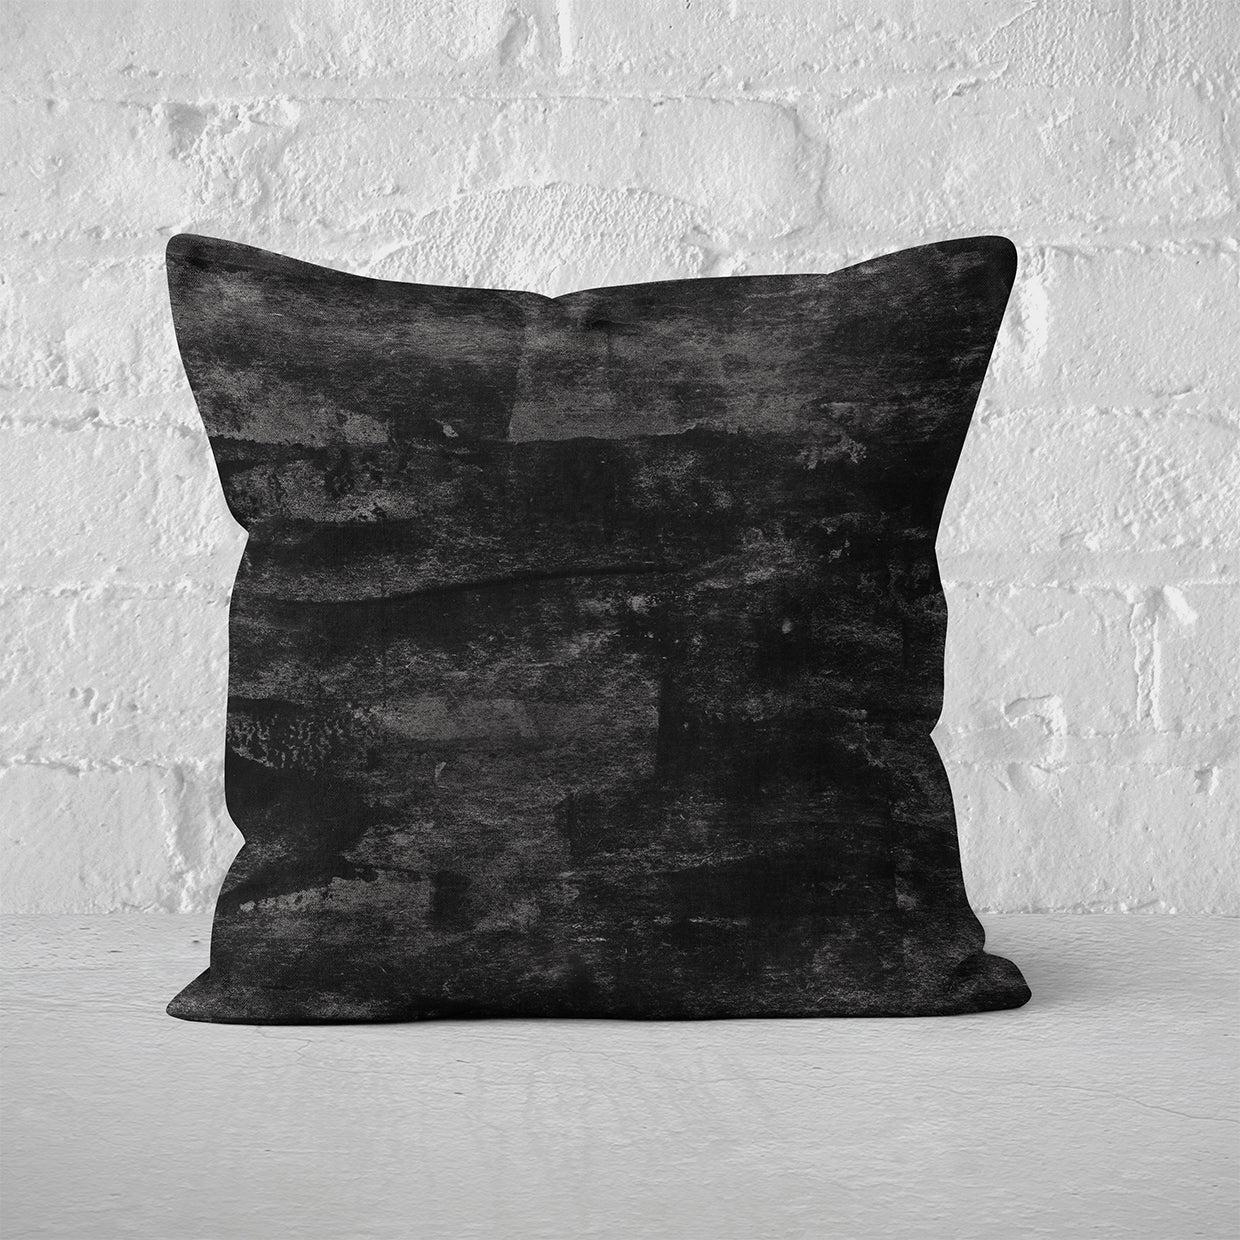 Pillow Cover Art Feature 'Satellite' - Black & Mid-Red - Cotton Twill